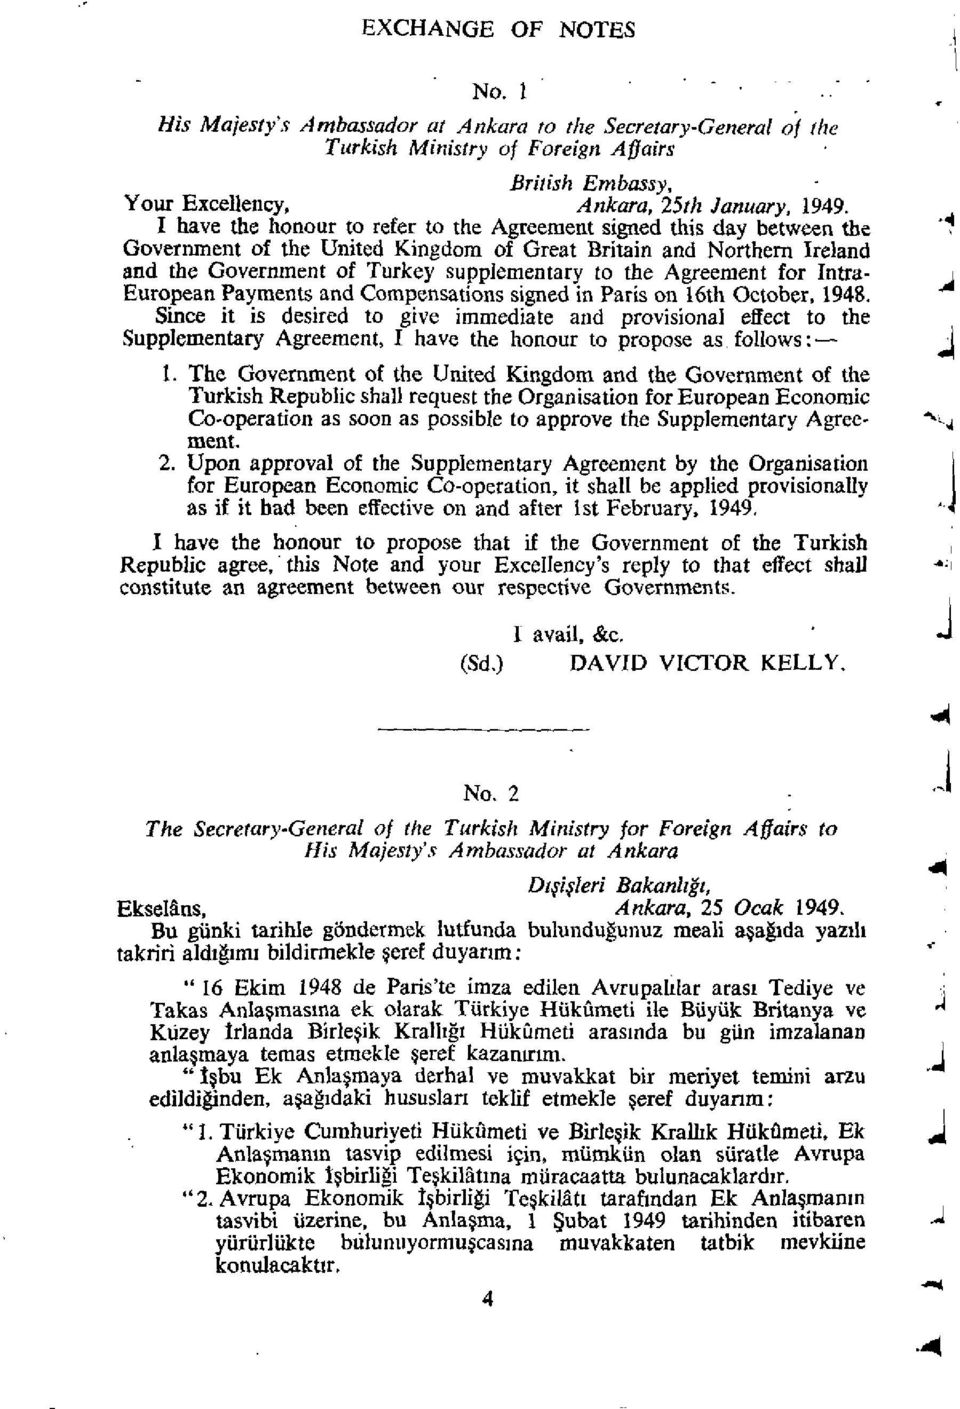 Agreement for Intra- European Payments and Compensations signed in Paris on 16th October, 1948.